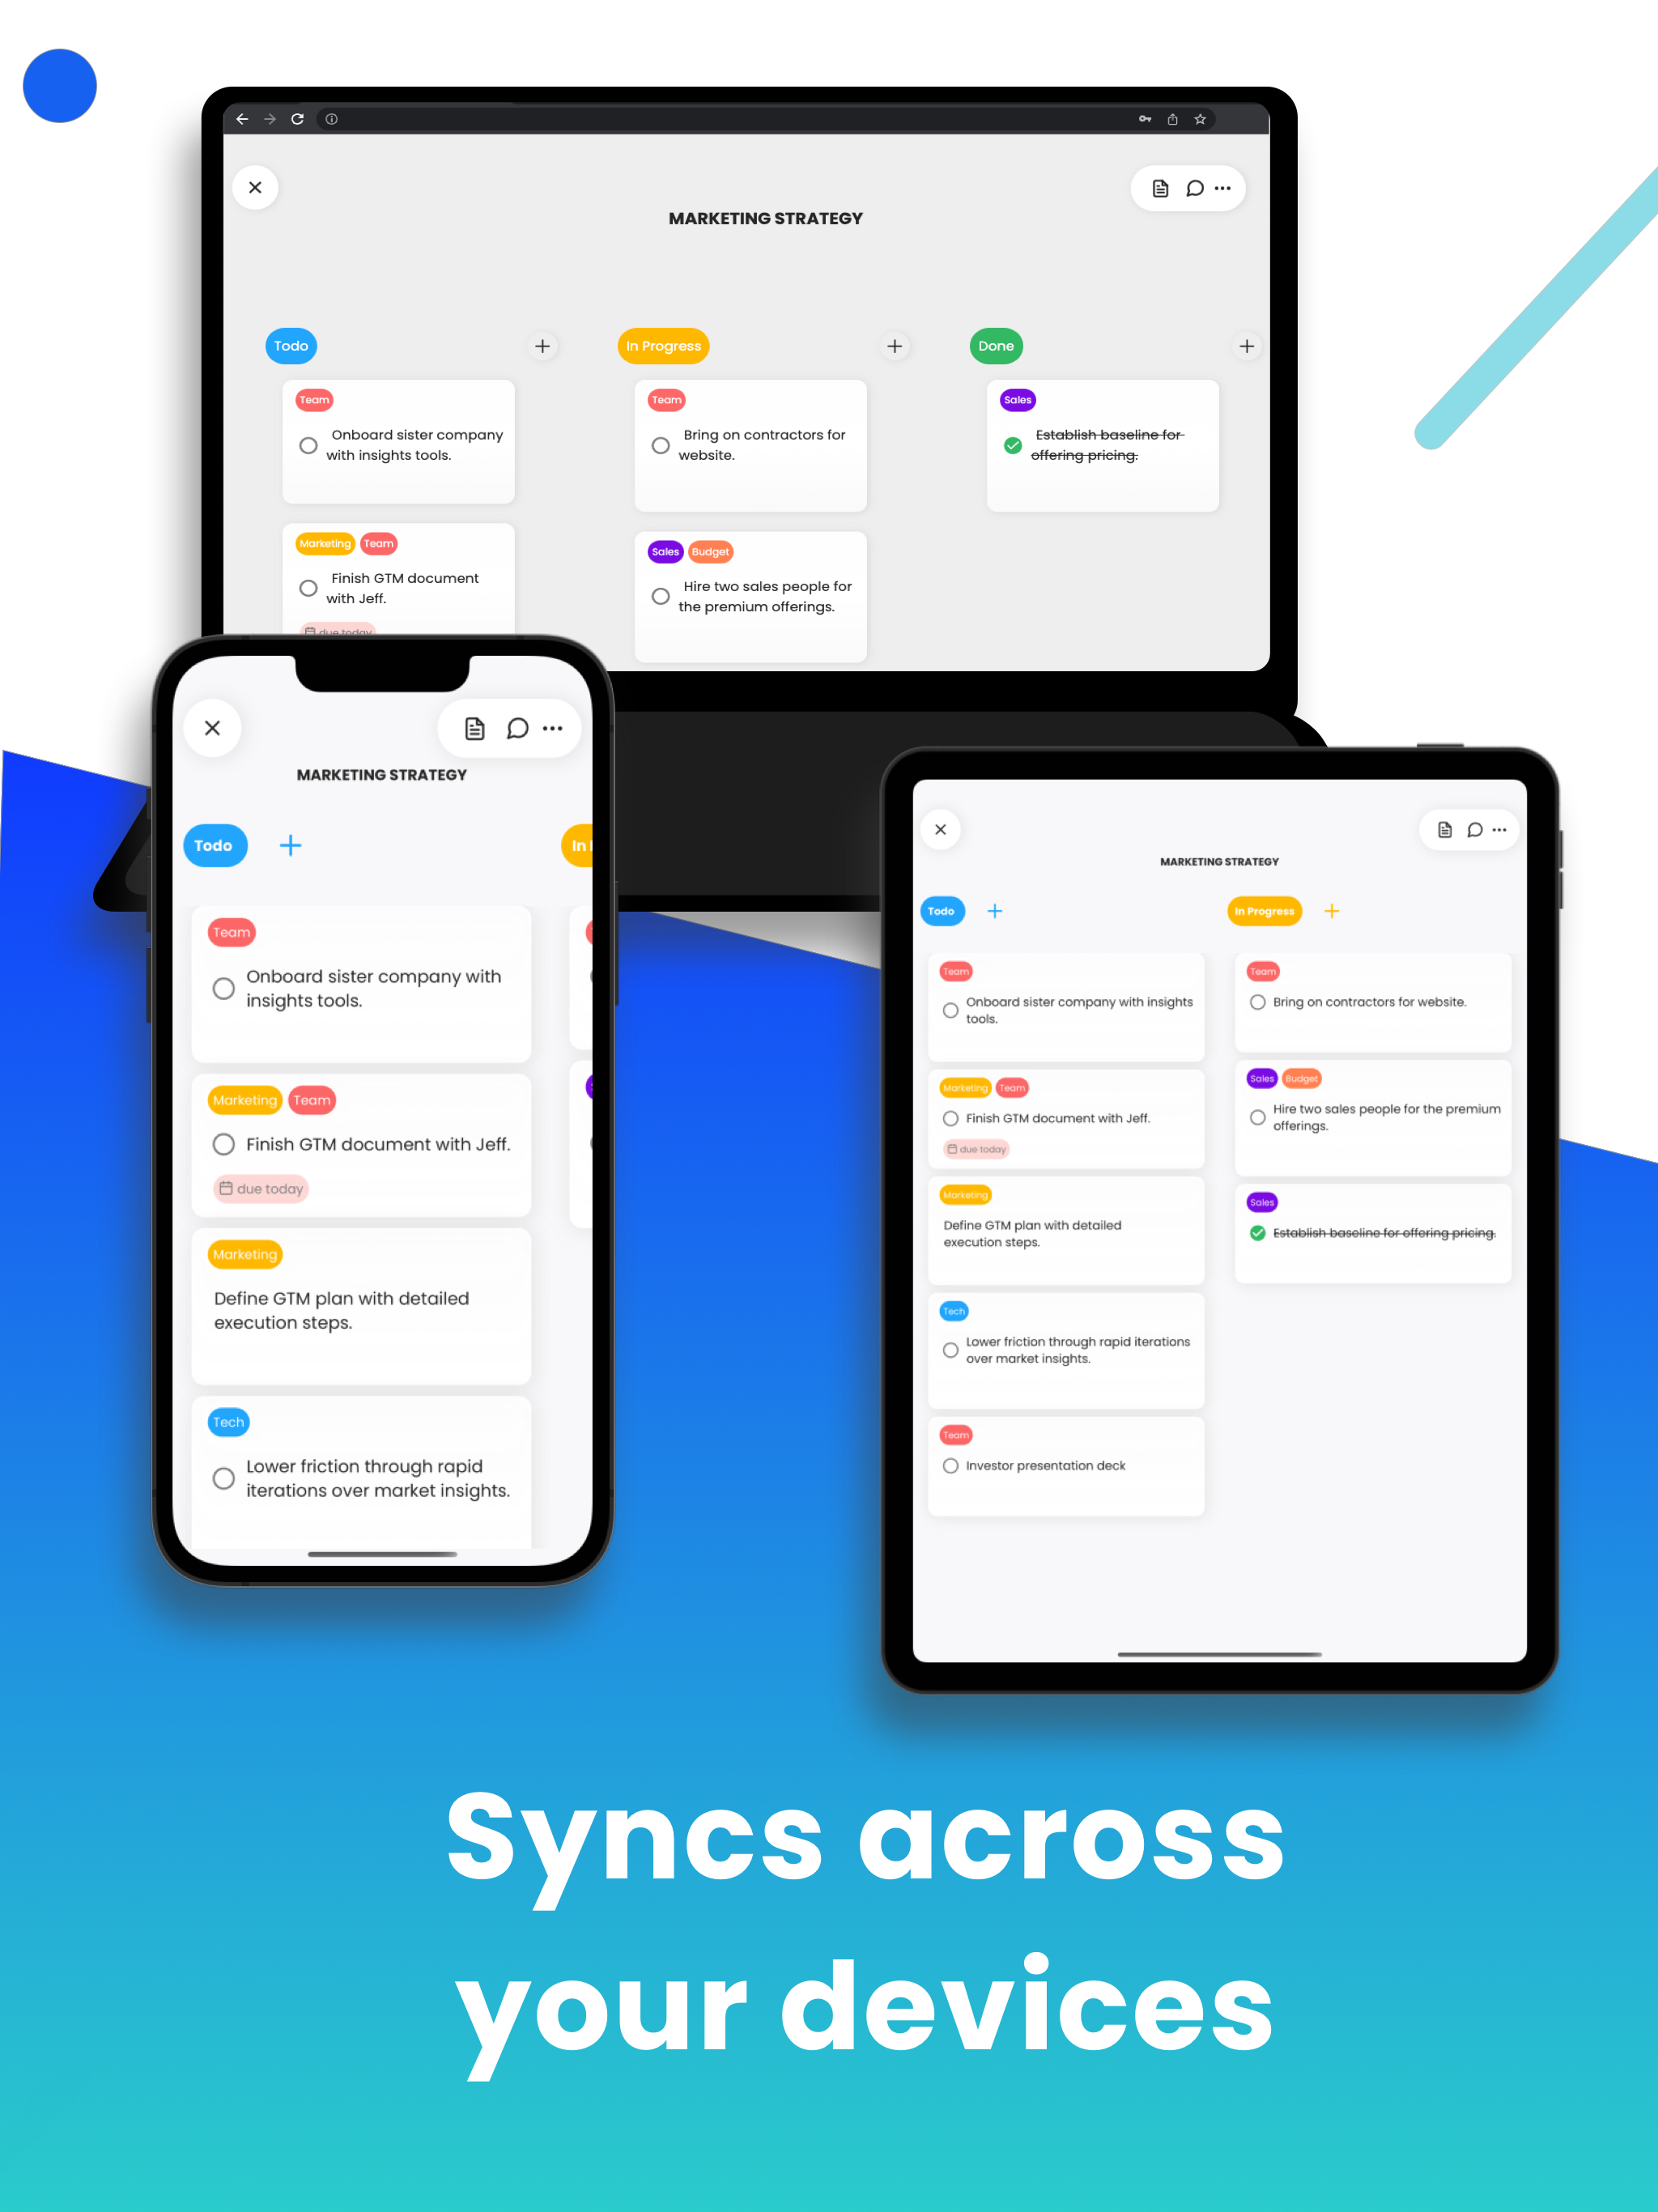 Syncs across your devices